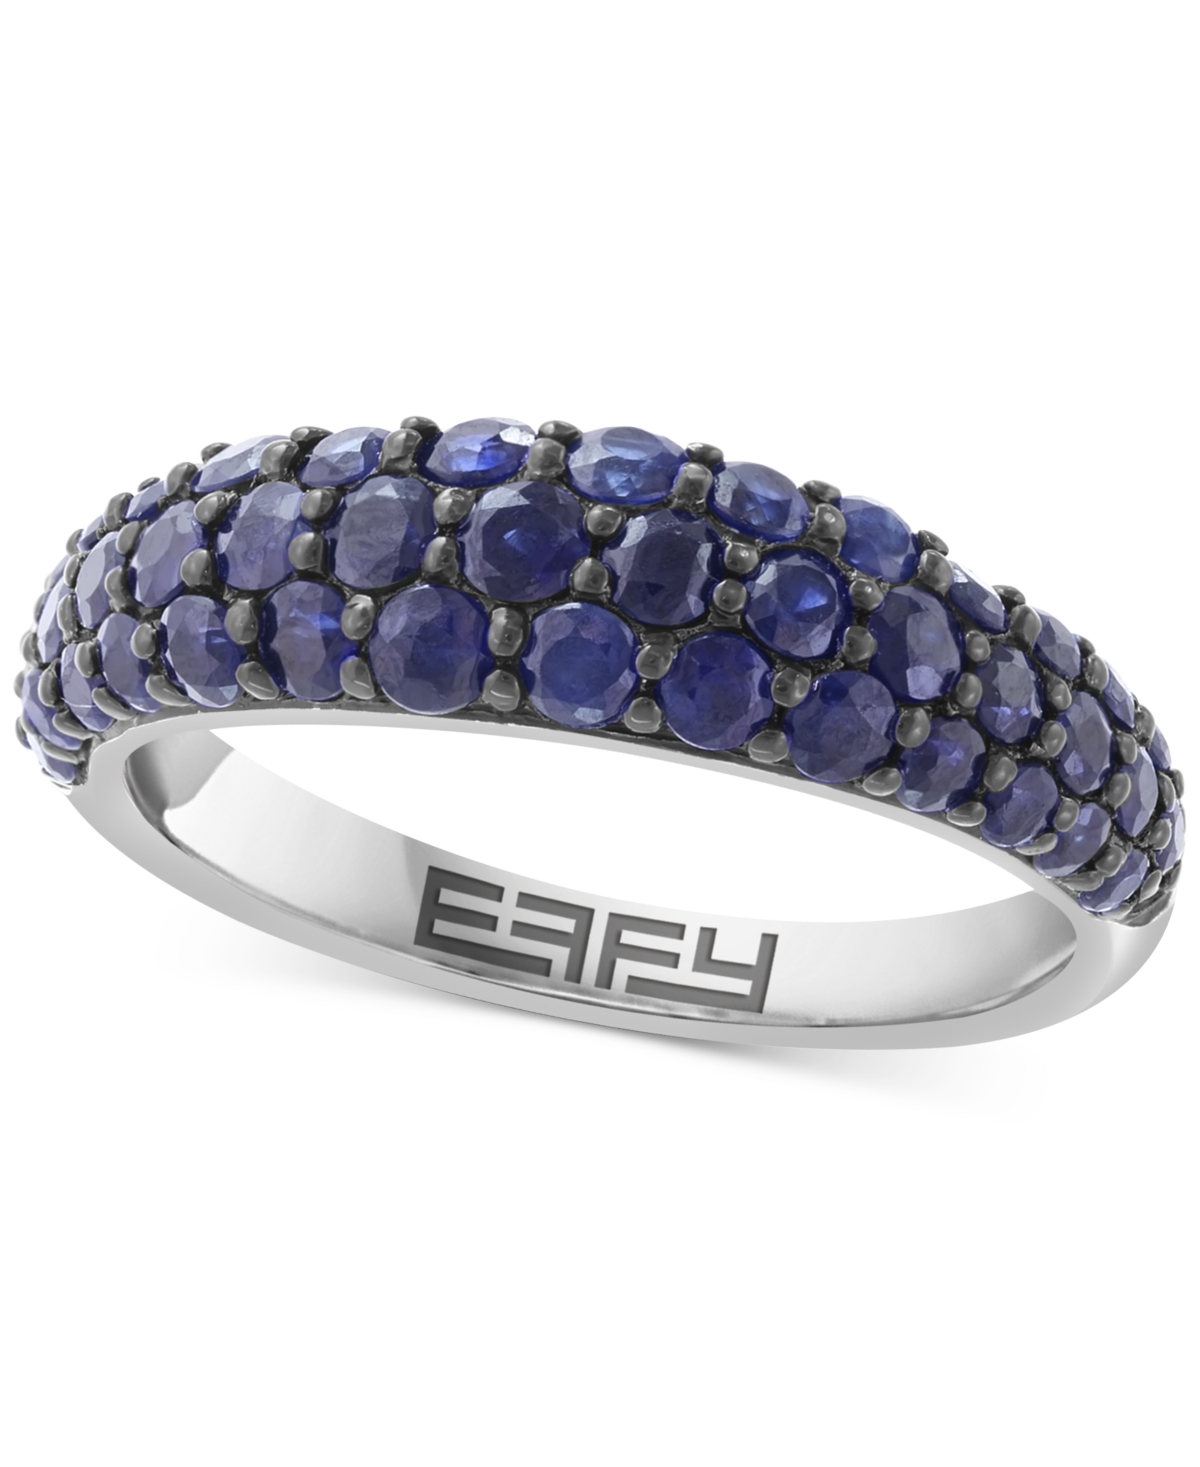 Effy Sapphire Cluster Dome Ring (1-5/8 ct. t.w.) in Sterling Silver - Silver